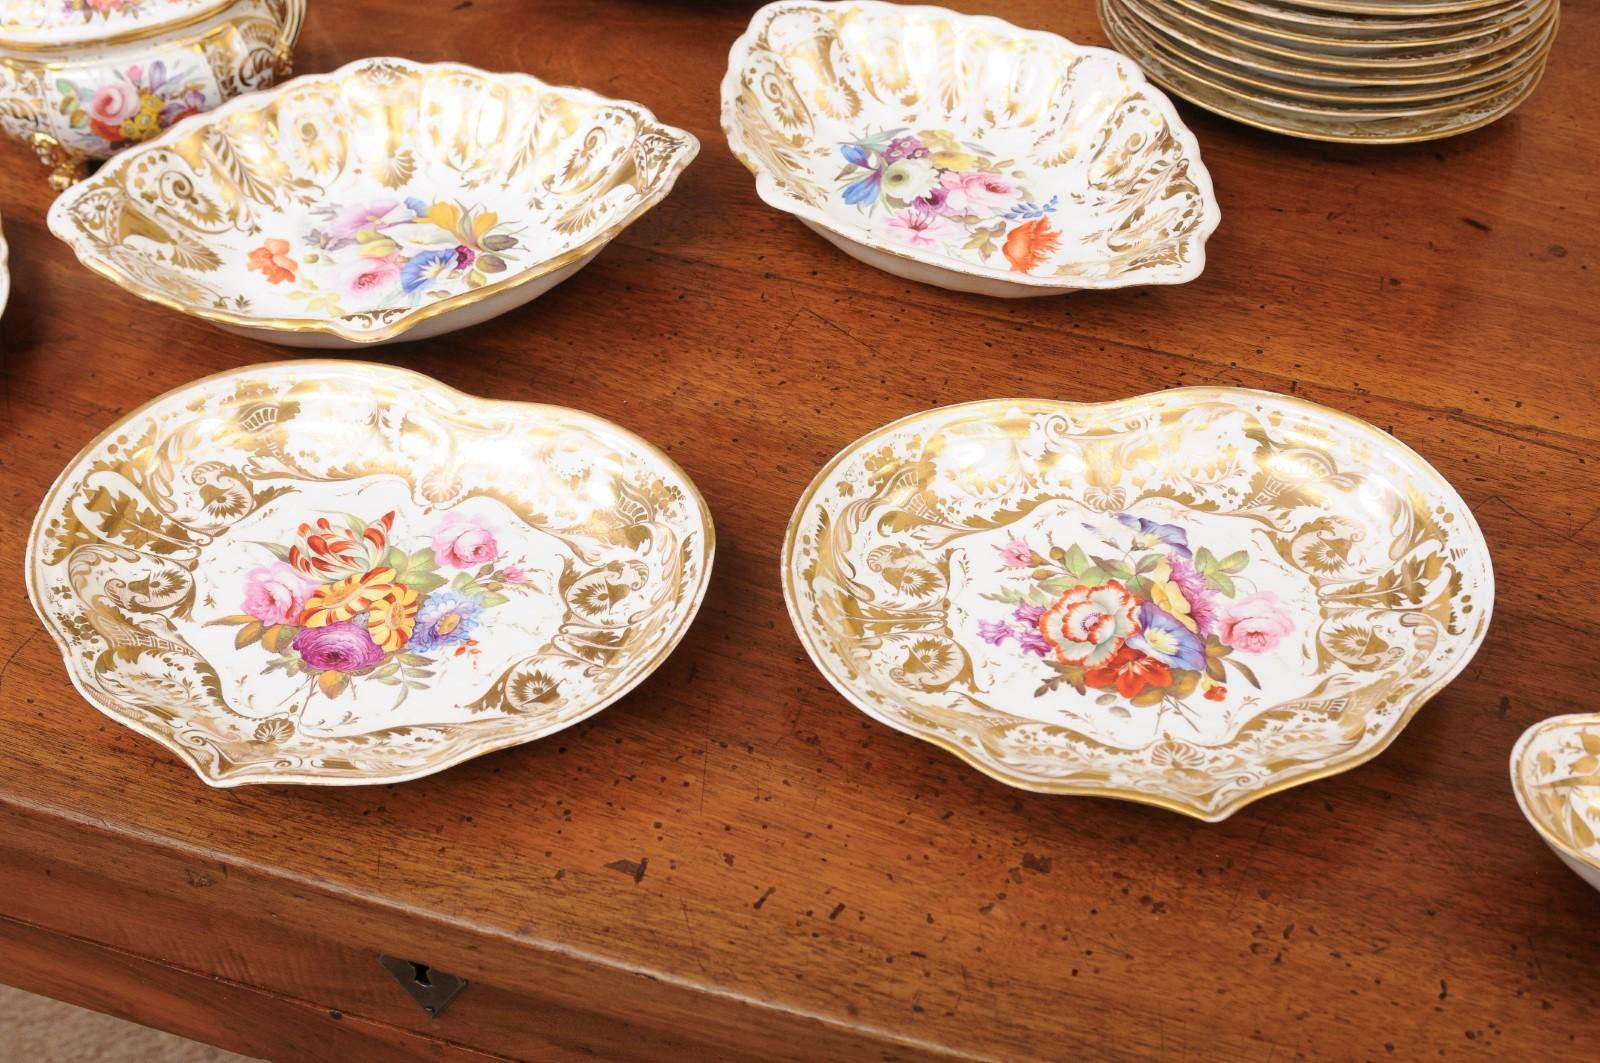 Set of Early 19th Century English Derby Porcelain Dessert Service For Sale 6